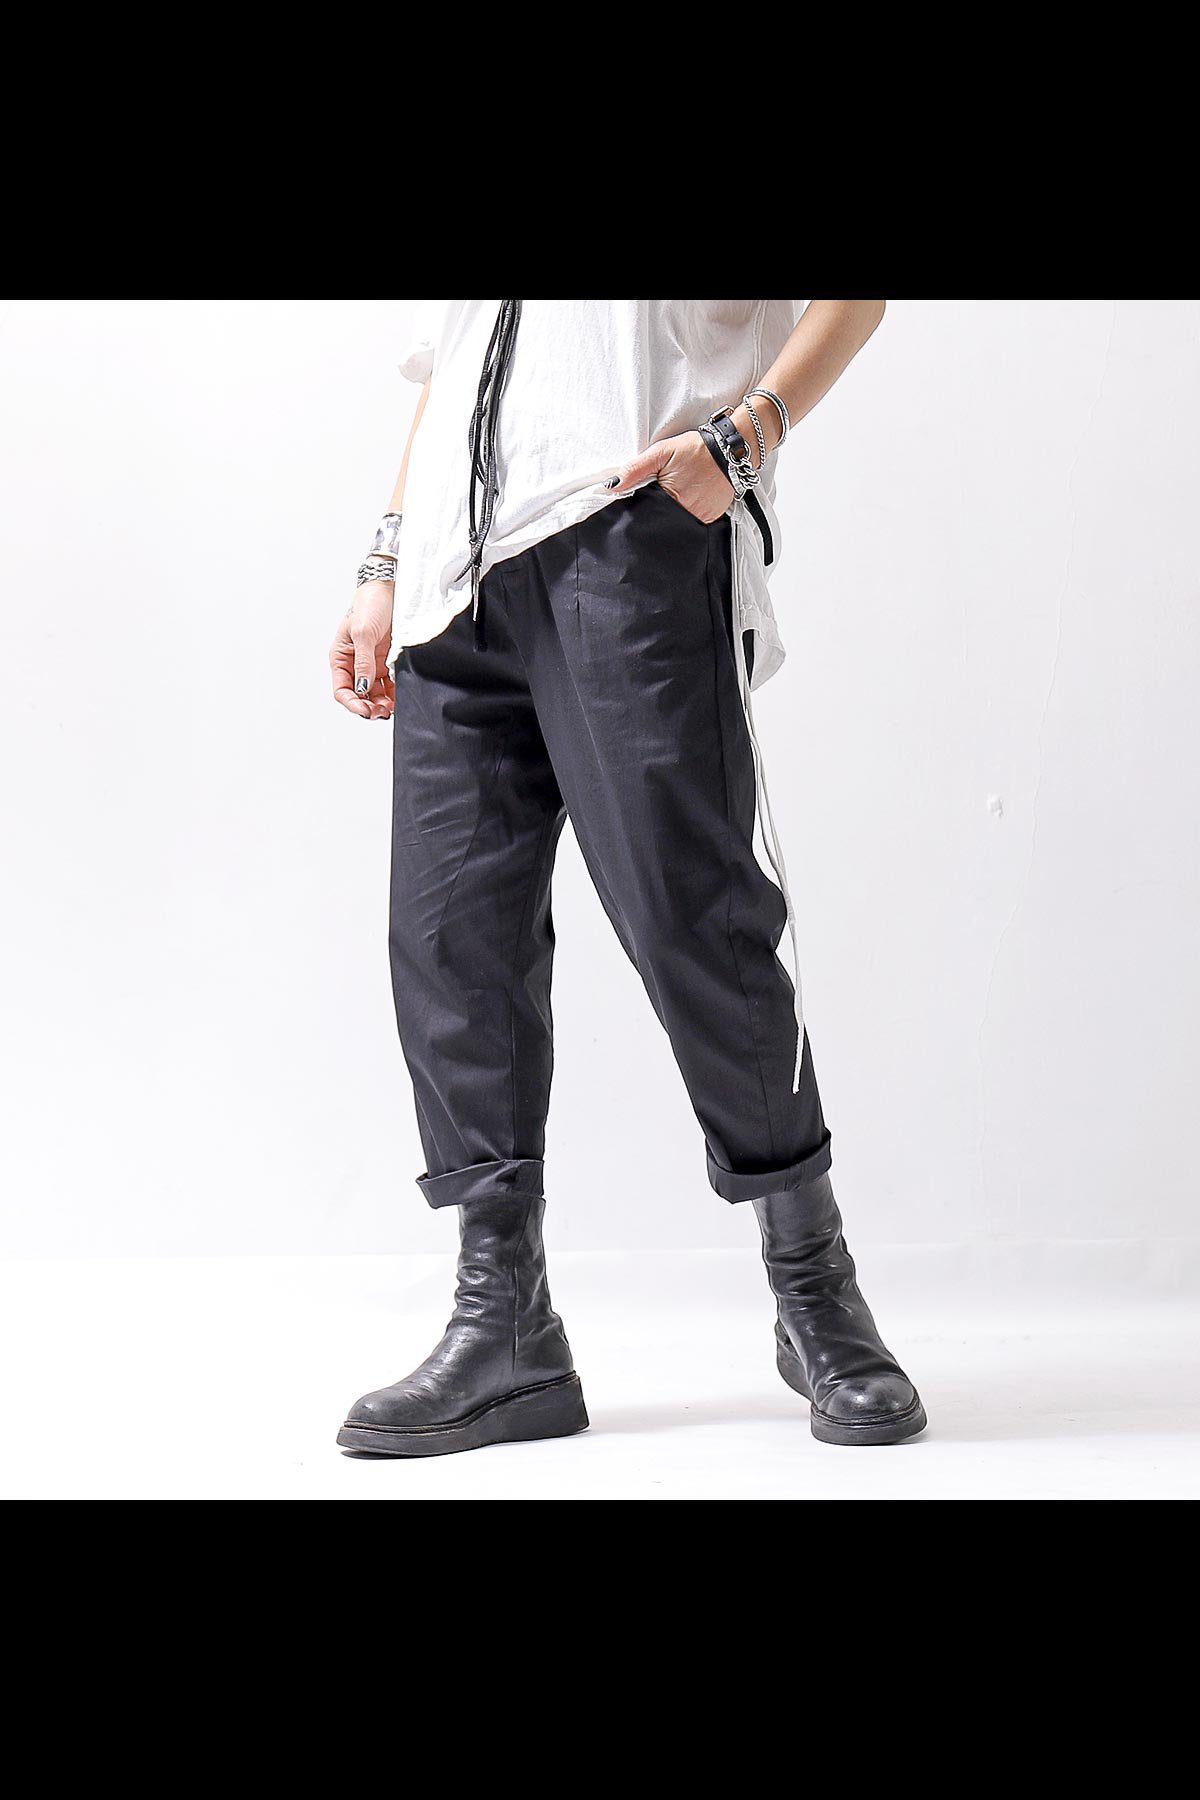 <img class='new_mark_img1' src='https://img.shop-pro.jp/img/new/icons8.gif' style='border:none;display:inline;margin:0px;padding:0px;width:auto;' />UNISEX PLAIN&CLEAN EASY PANTS MST431_BLACK